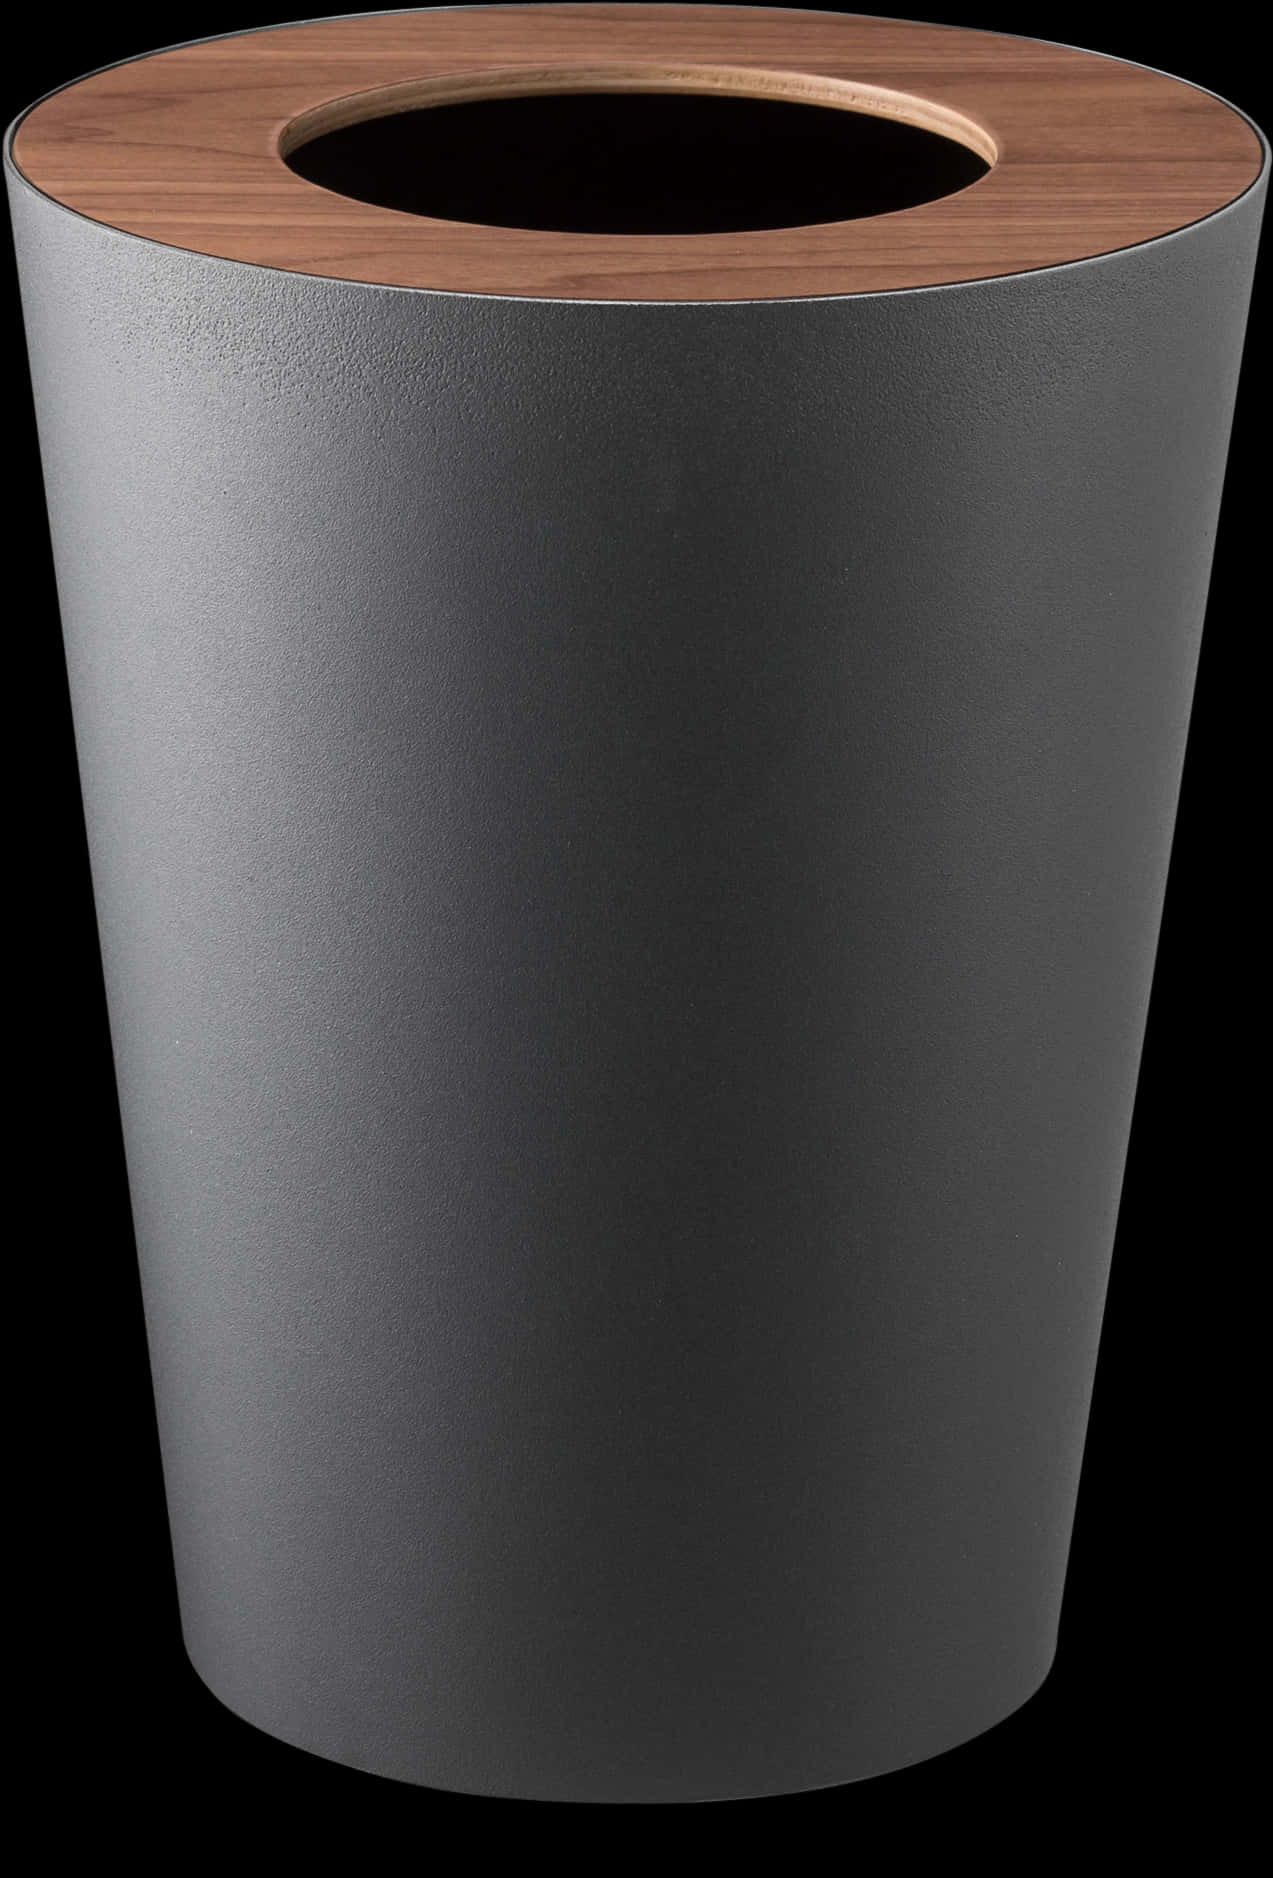 A Close-up Of A Cup